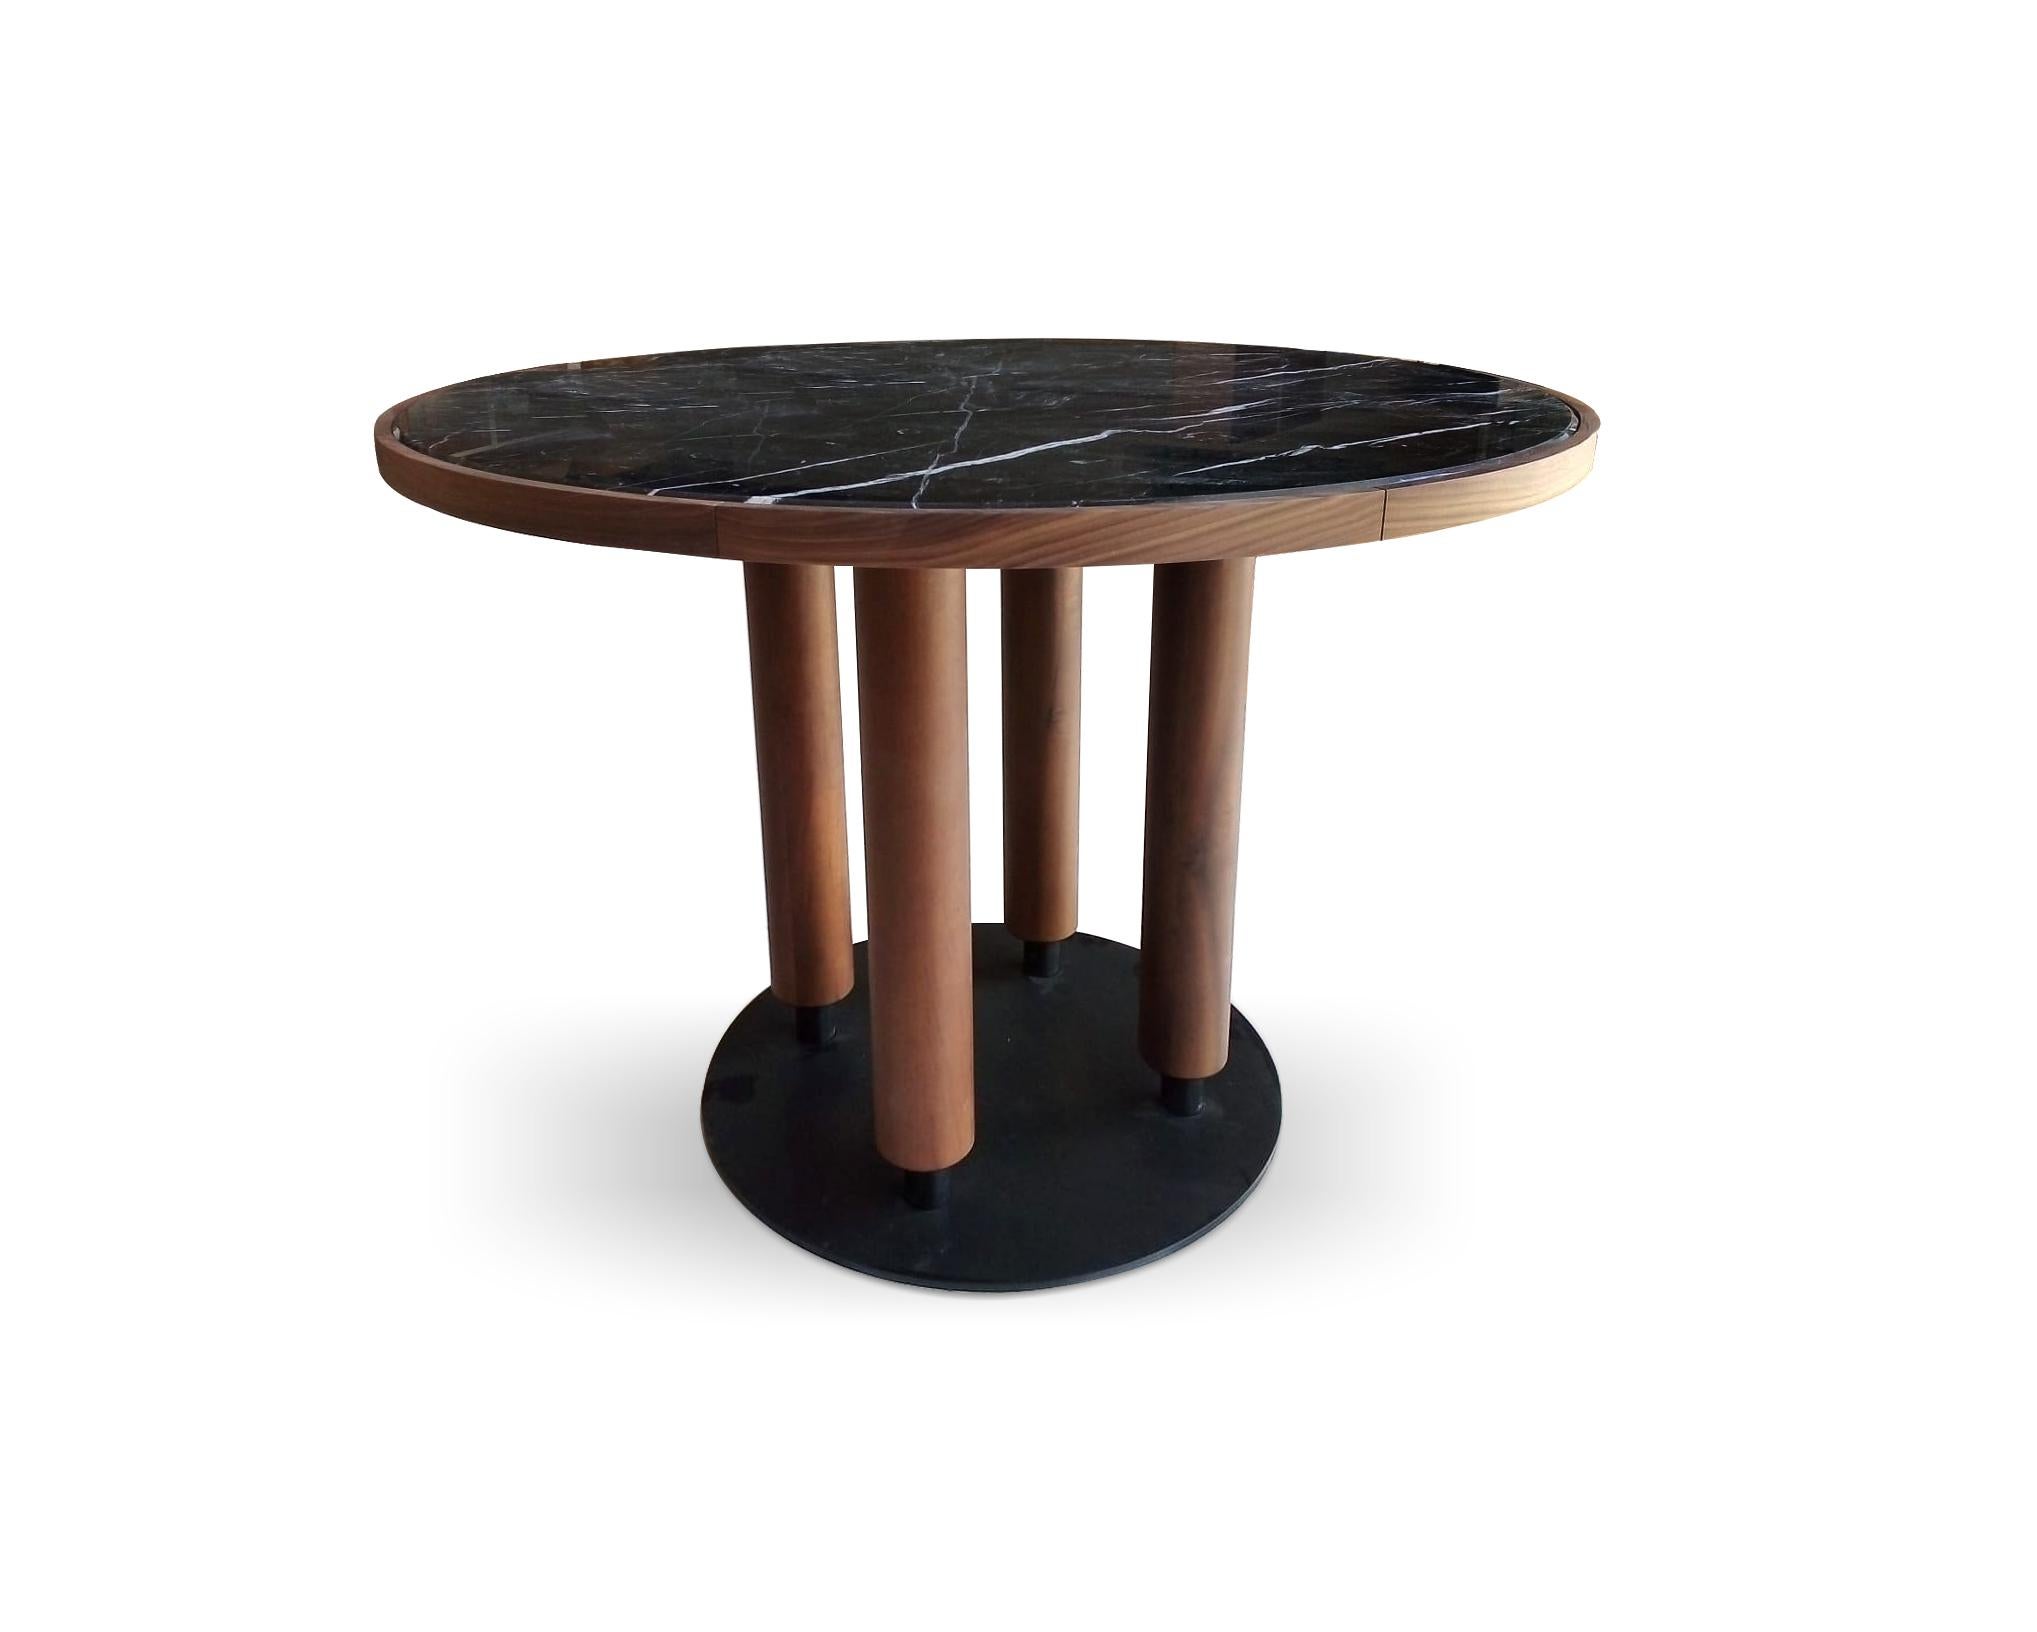 Unique collin dining table by Collector
Dimensions: D 160 x H 77 cm
Materials: Glass, oak, metal
Other materials available. 

The Collector brand aims to be part of the daily life by fusing furniture to our home routine and lifestyle, that’s